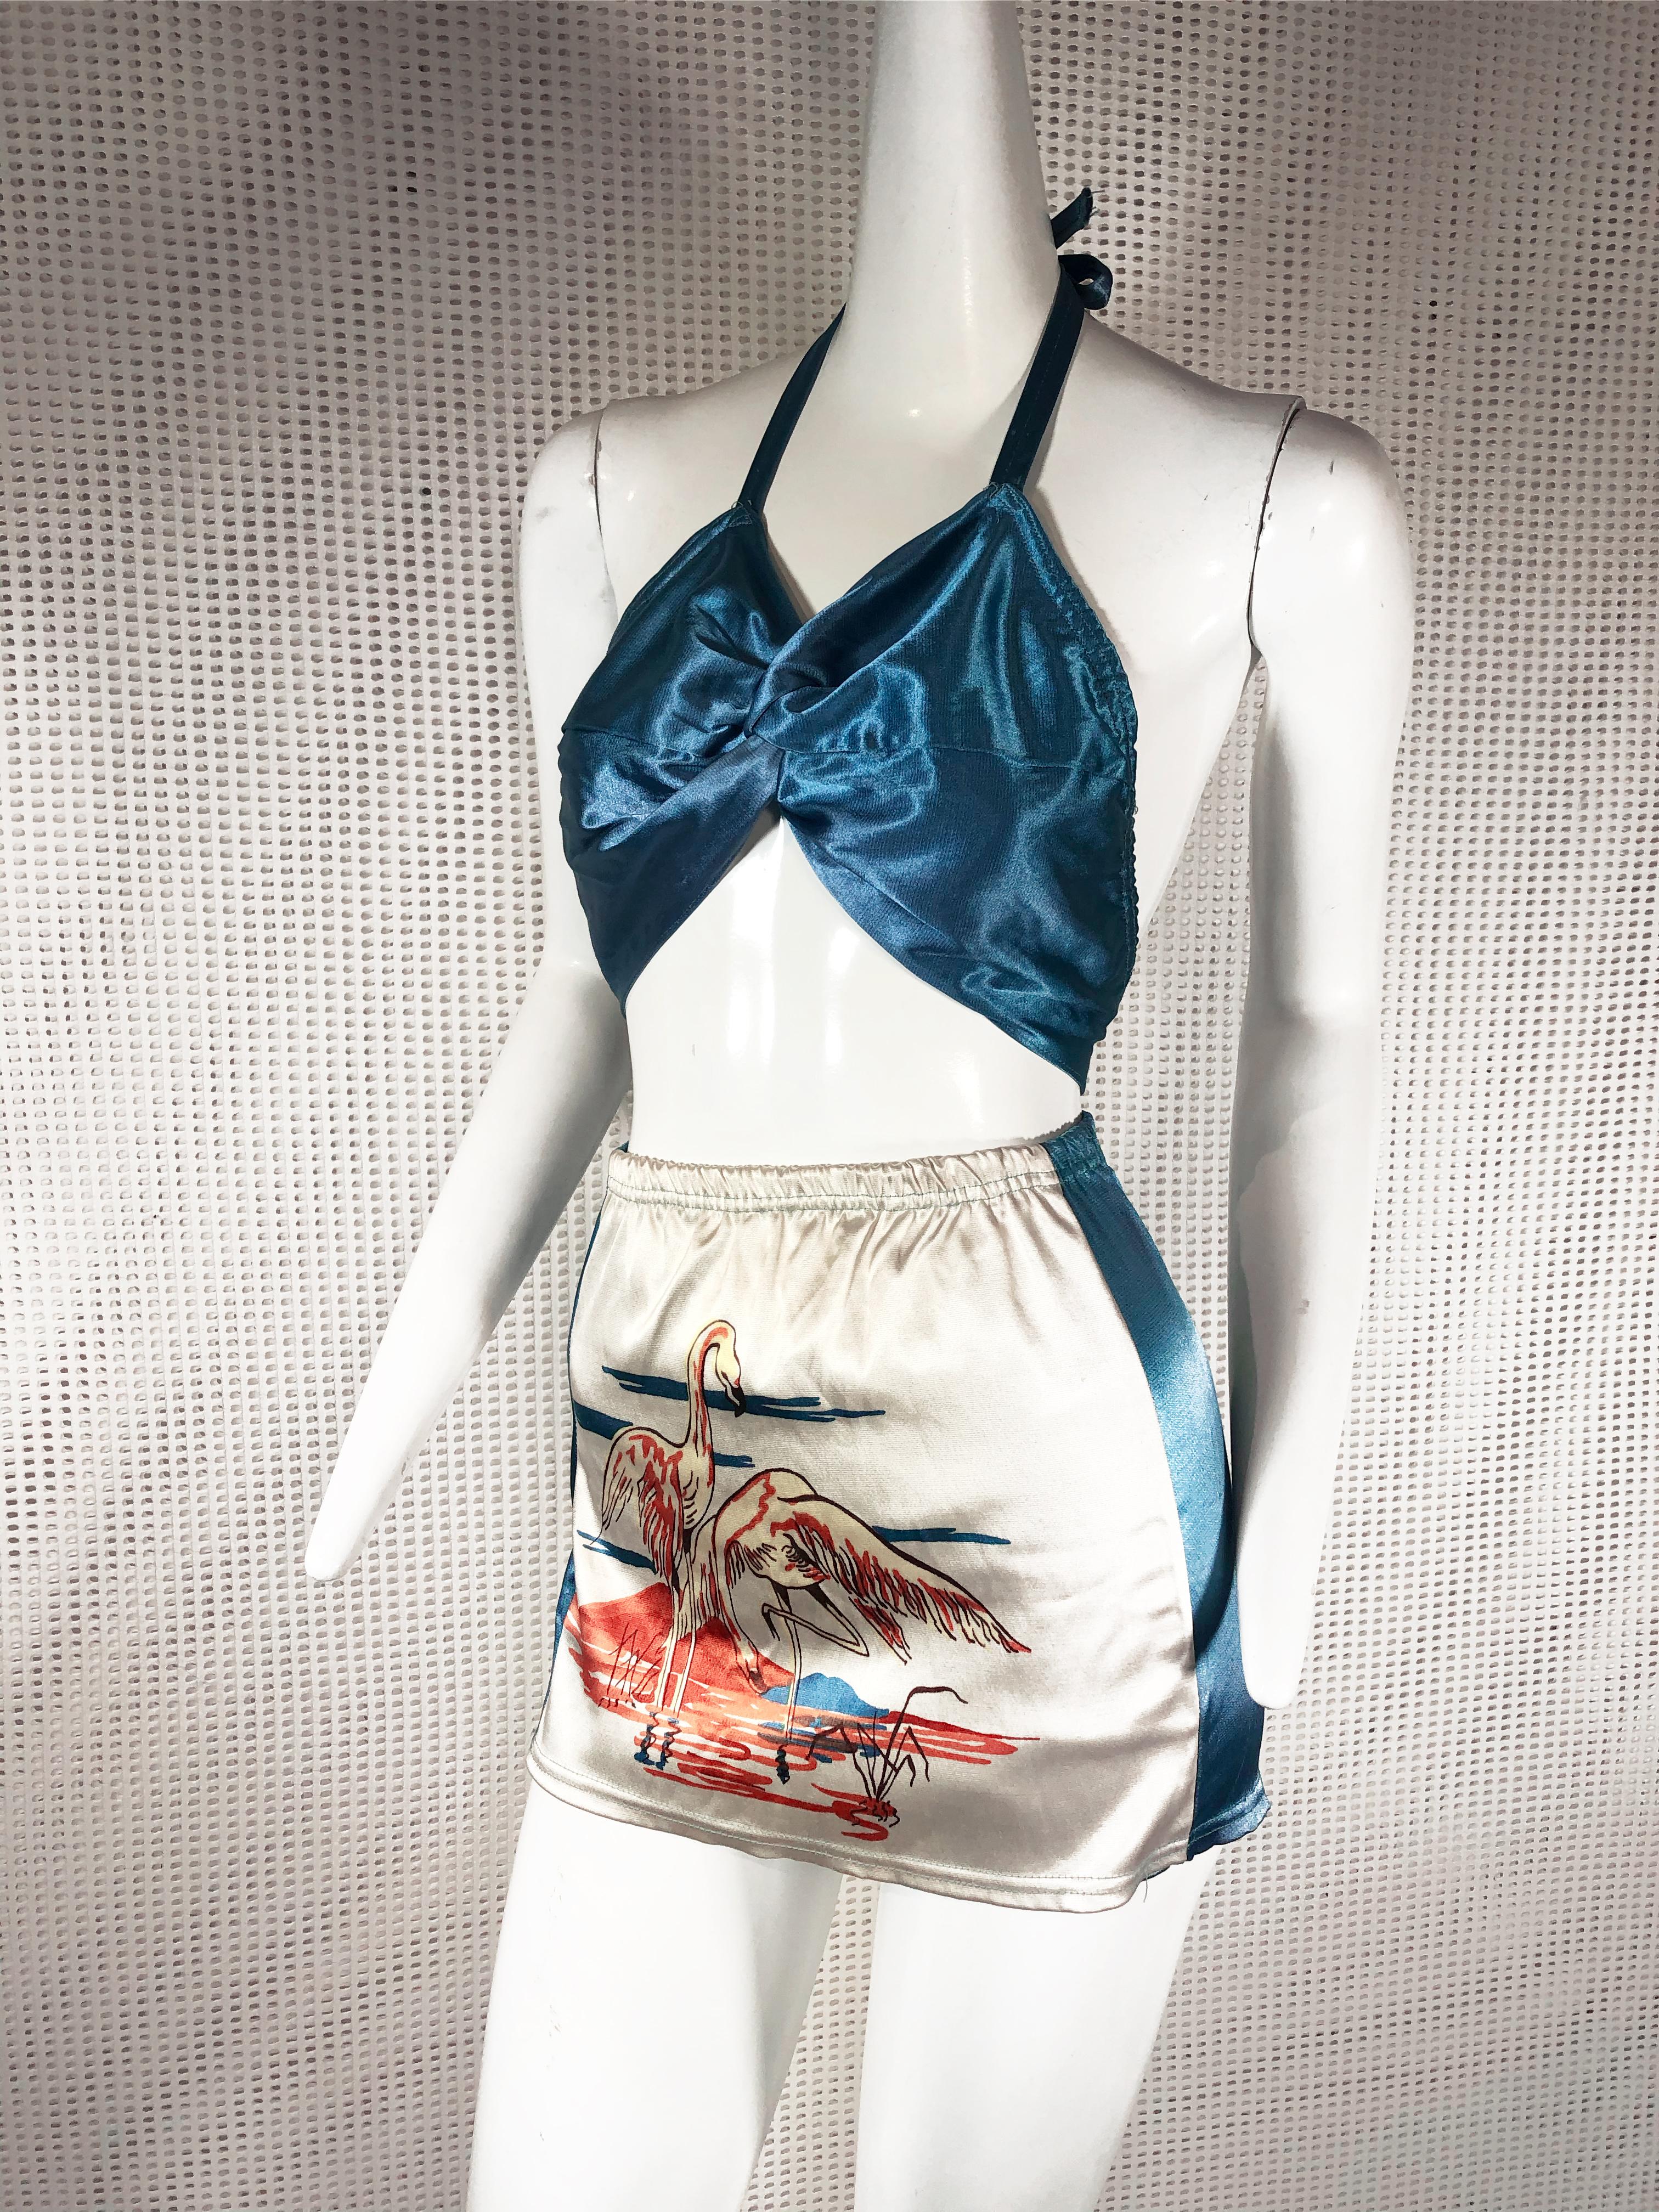 1940s Hollywood style flamingo print 2-piece Pin-Up swimsuit / playsuit: halter tie top and skirted, high-waisted bottoms in azure blue and white satin. Size Medium. No zipper, pull-on. Excellent condition.